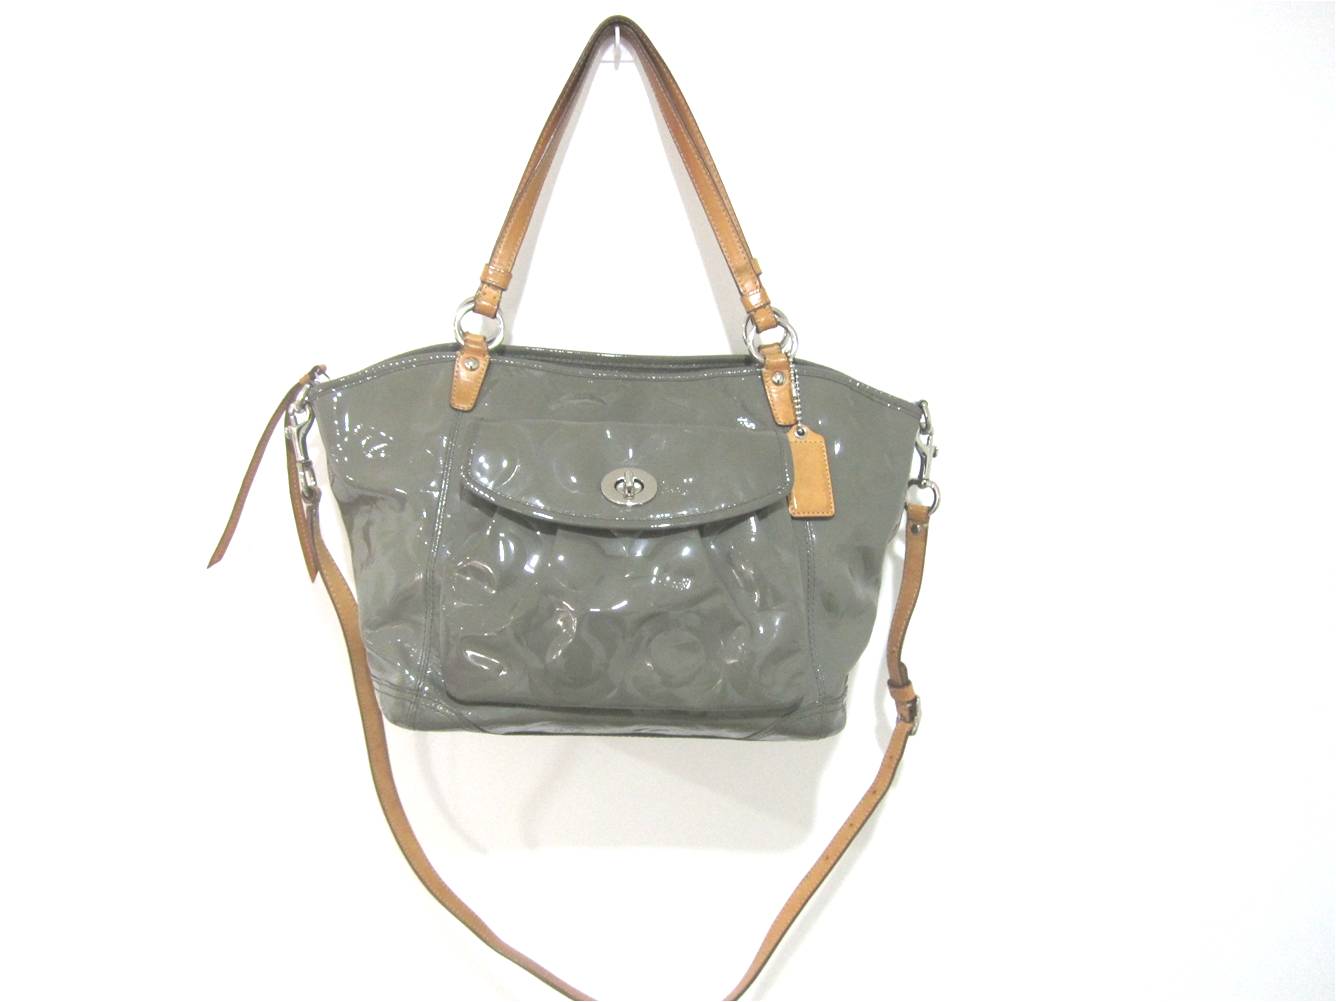 The Bags Affairs ~ Satisfy your lust for designer bags: COACH GREY LEAH PATENT LEATHER TOTE ...